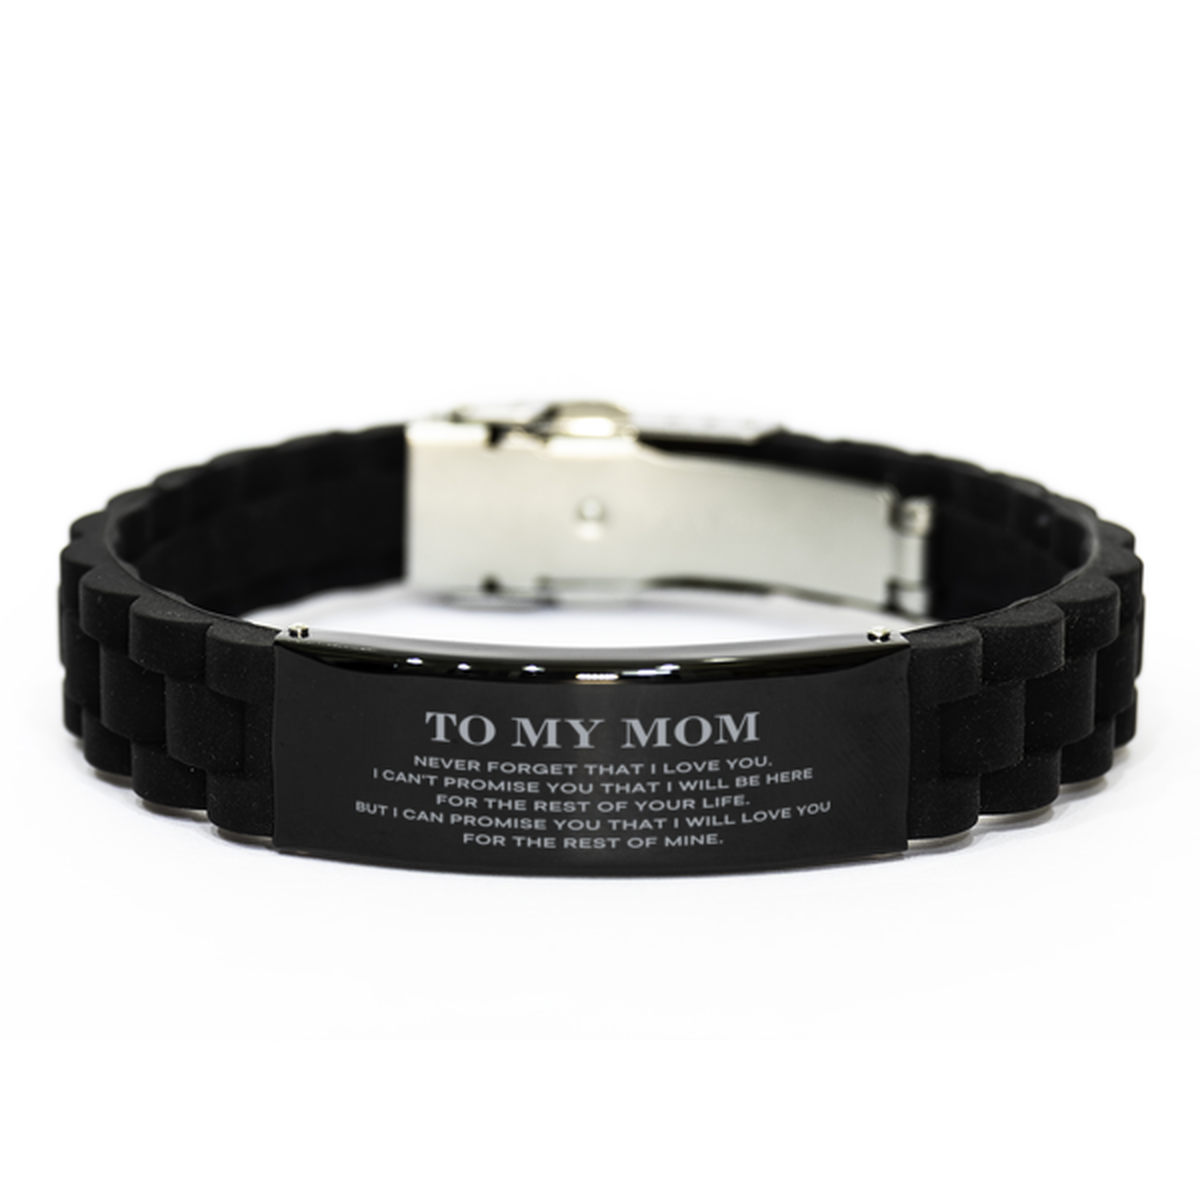 To My Mom Gifts, I will love you for the rest of mine, Love Mom Bracelet, Birthday Christmas Unique Black Glidelock Clasp Bracelet For Mom